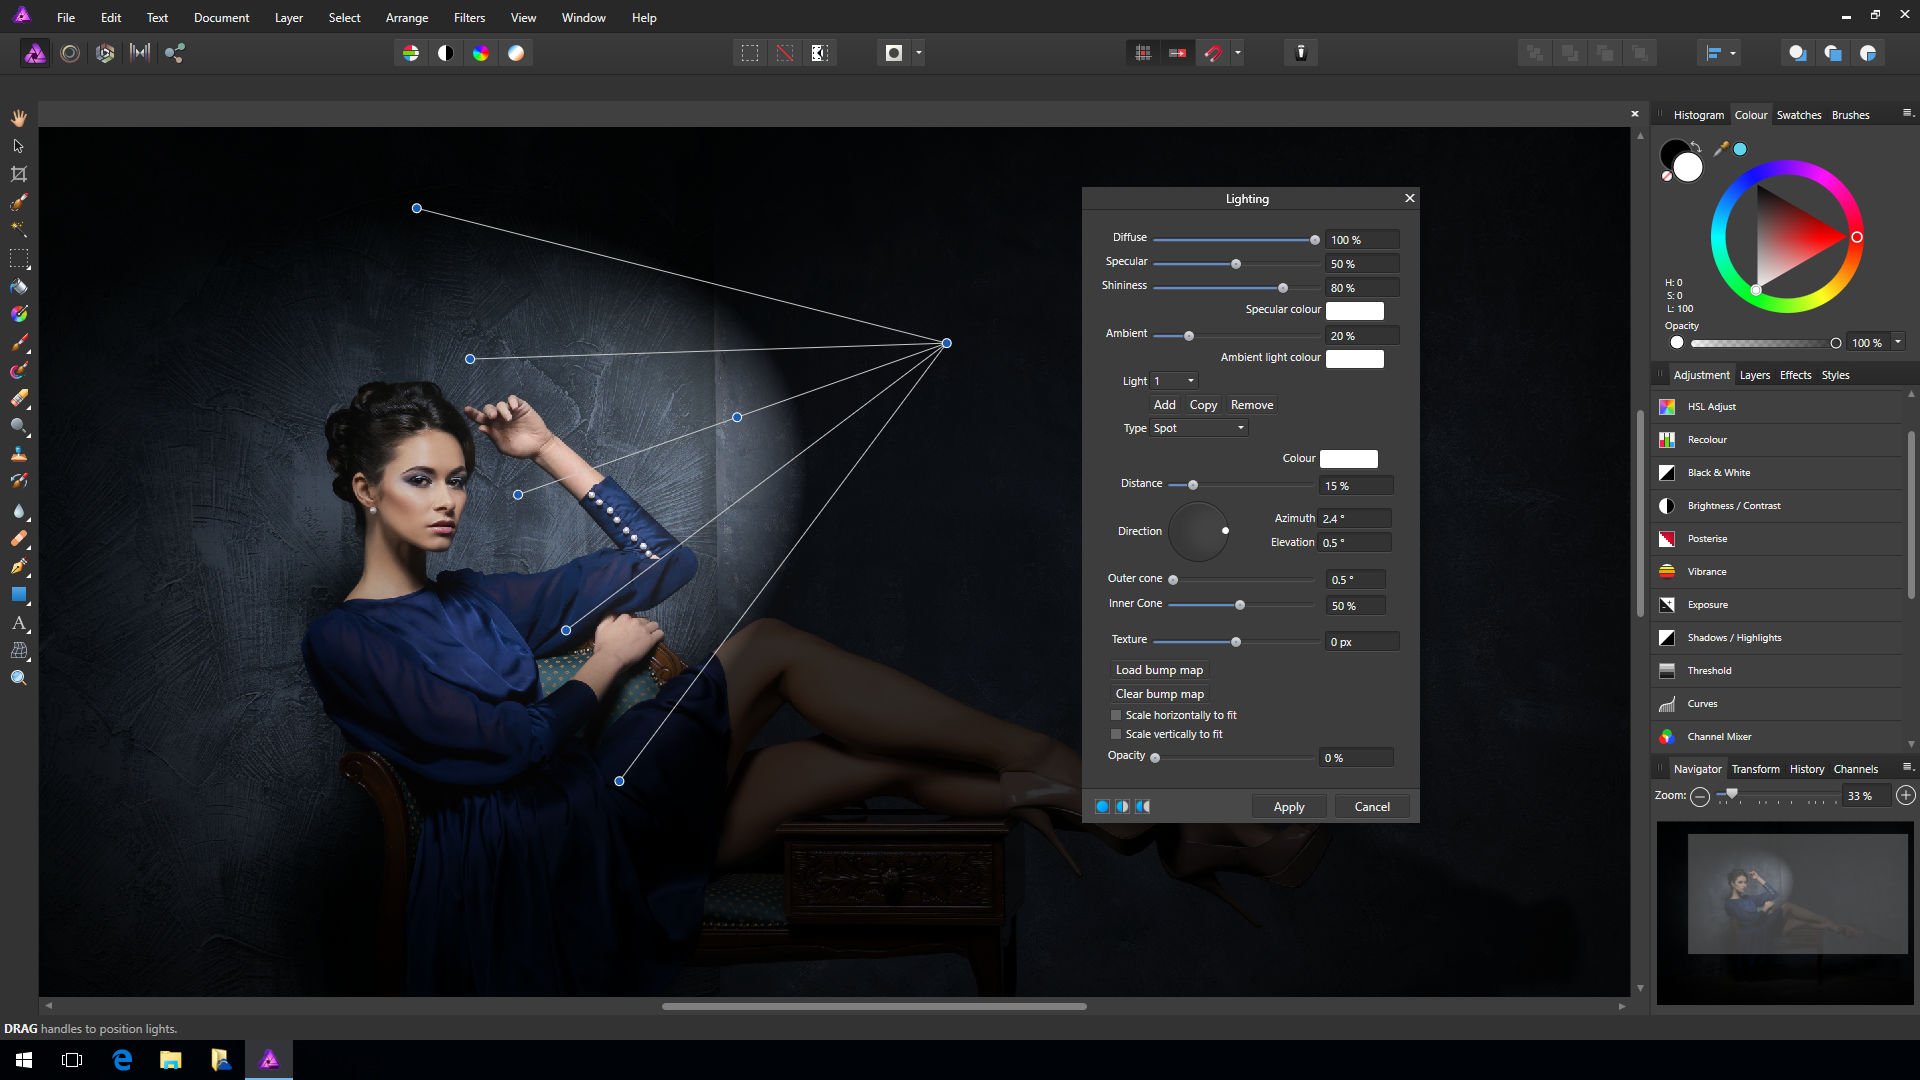 affinity photo free download full version for windows